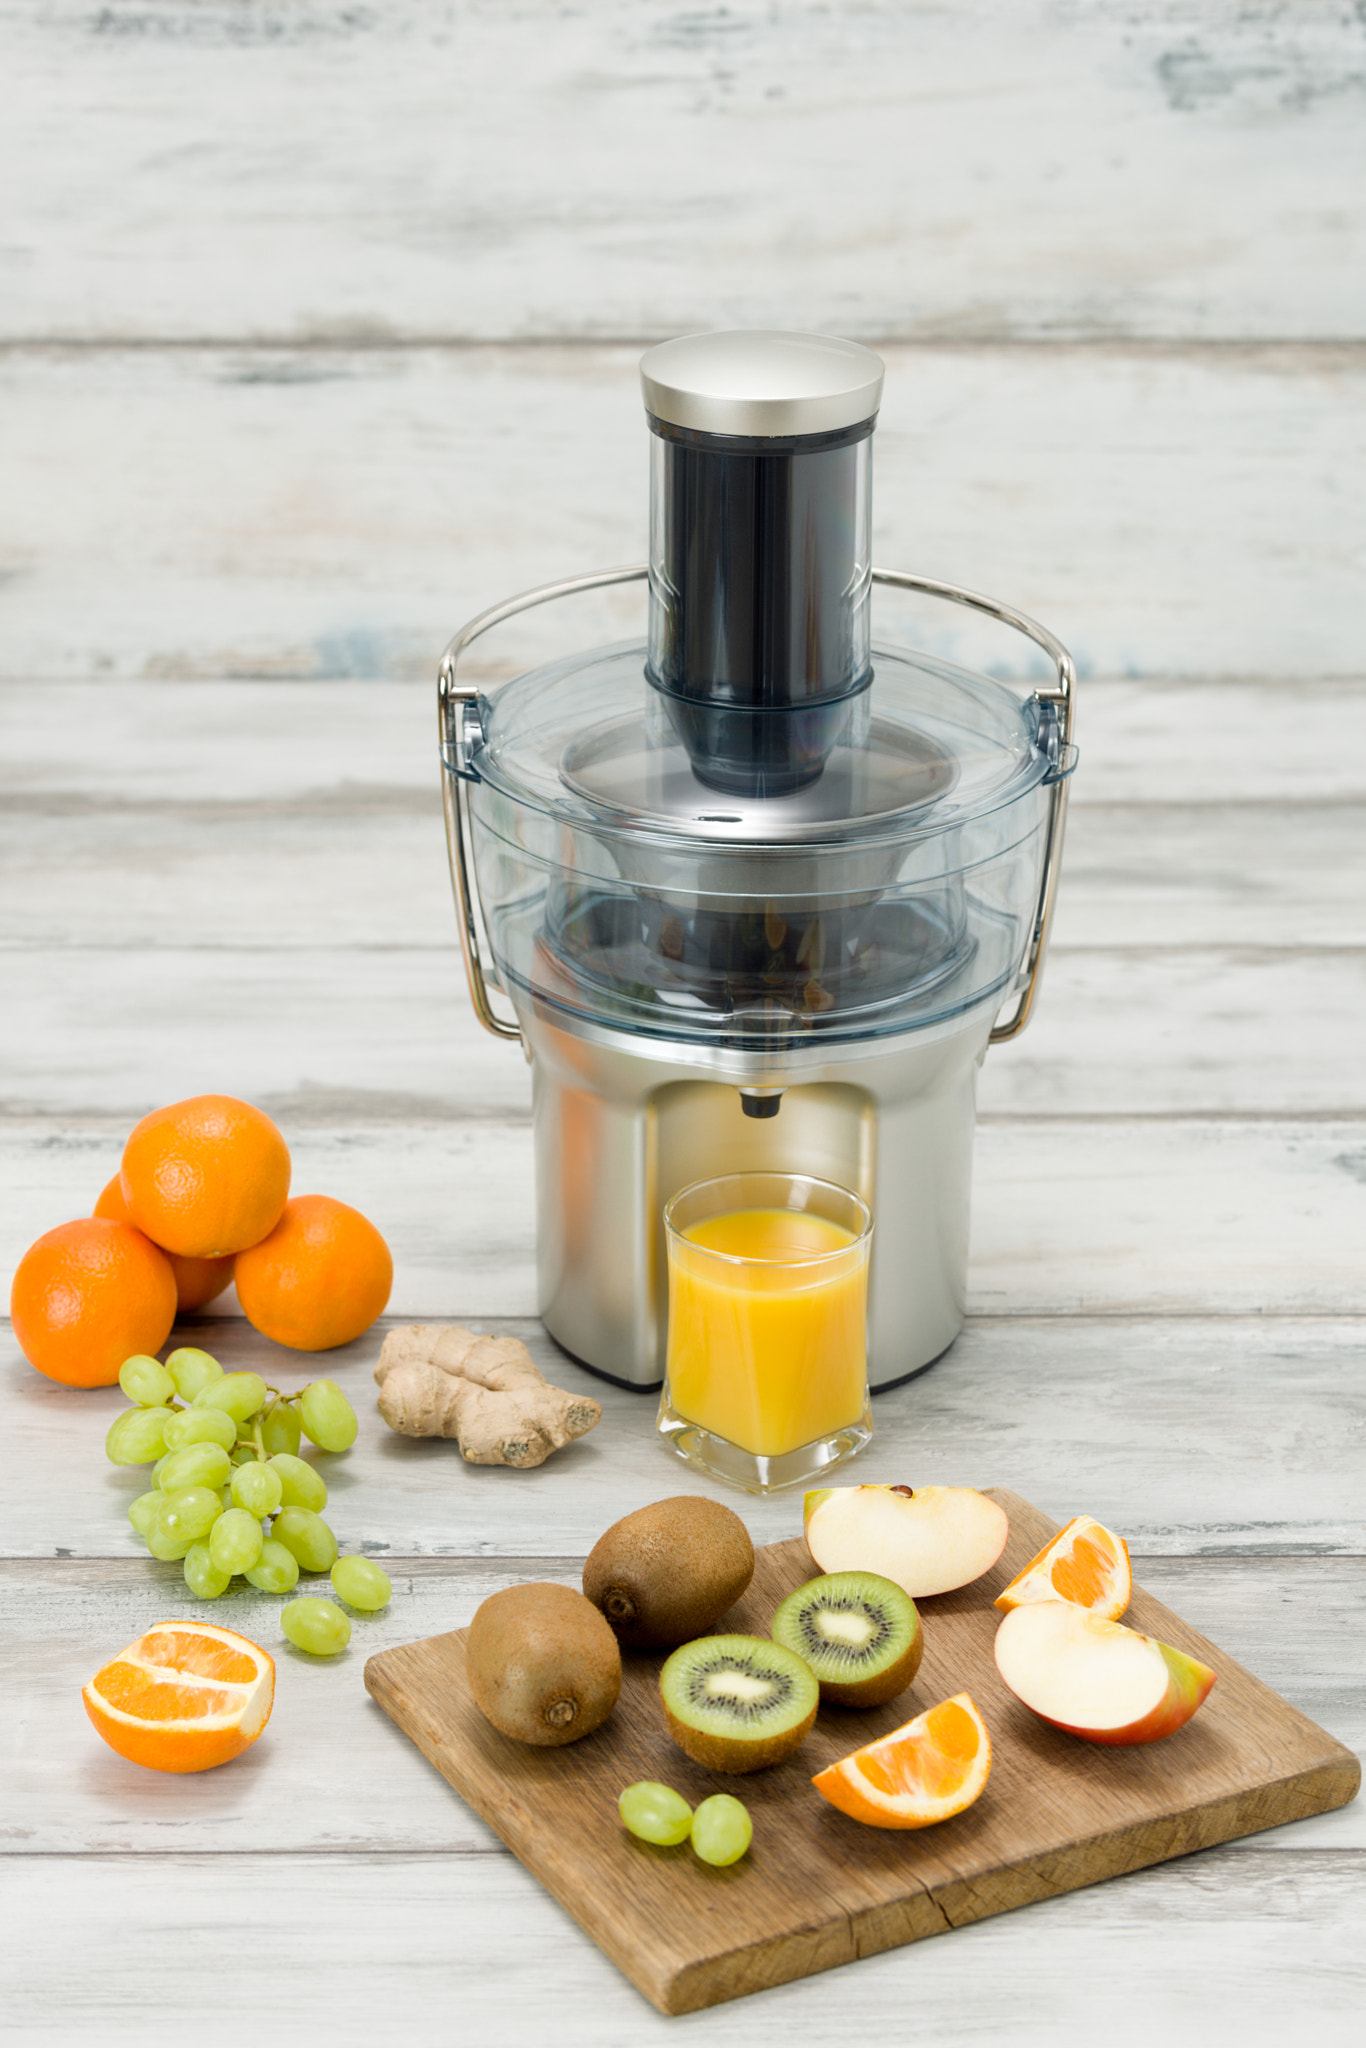 Nikon D810 sample photo. Modern electric juicer, various fruit and glass of freshly made juice, healthy lifestyle concept photography